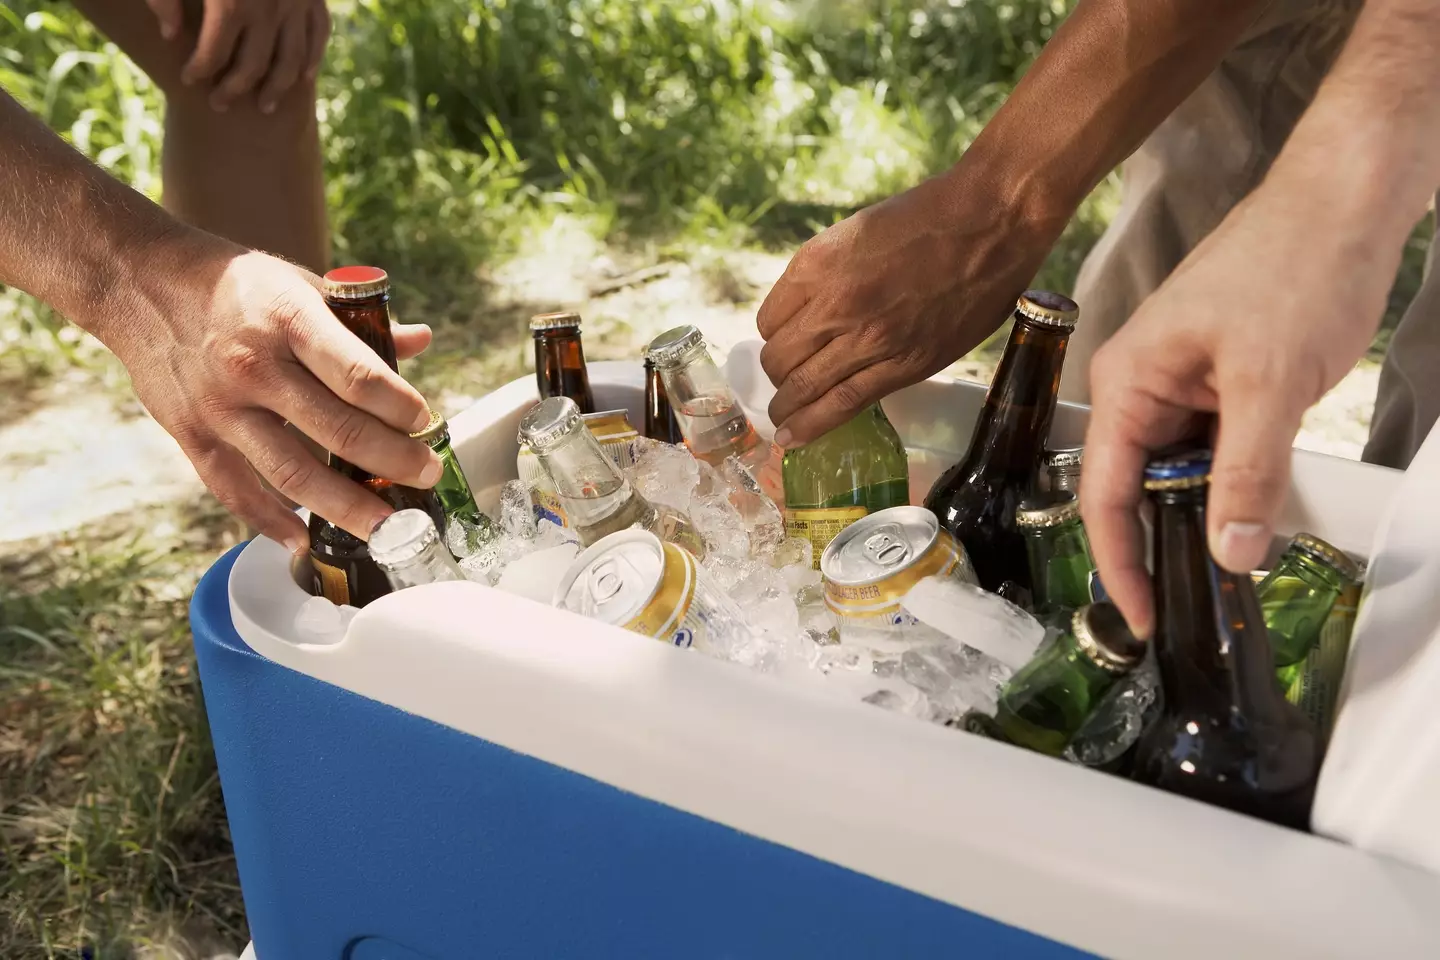 Cold beer in a cooler (Getty Stock Images)